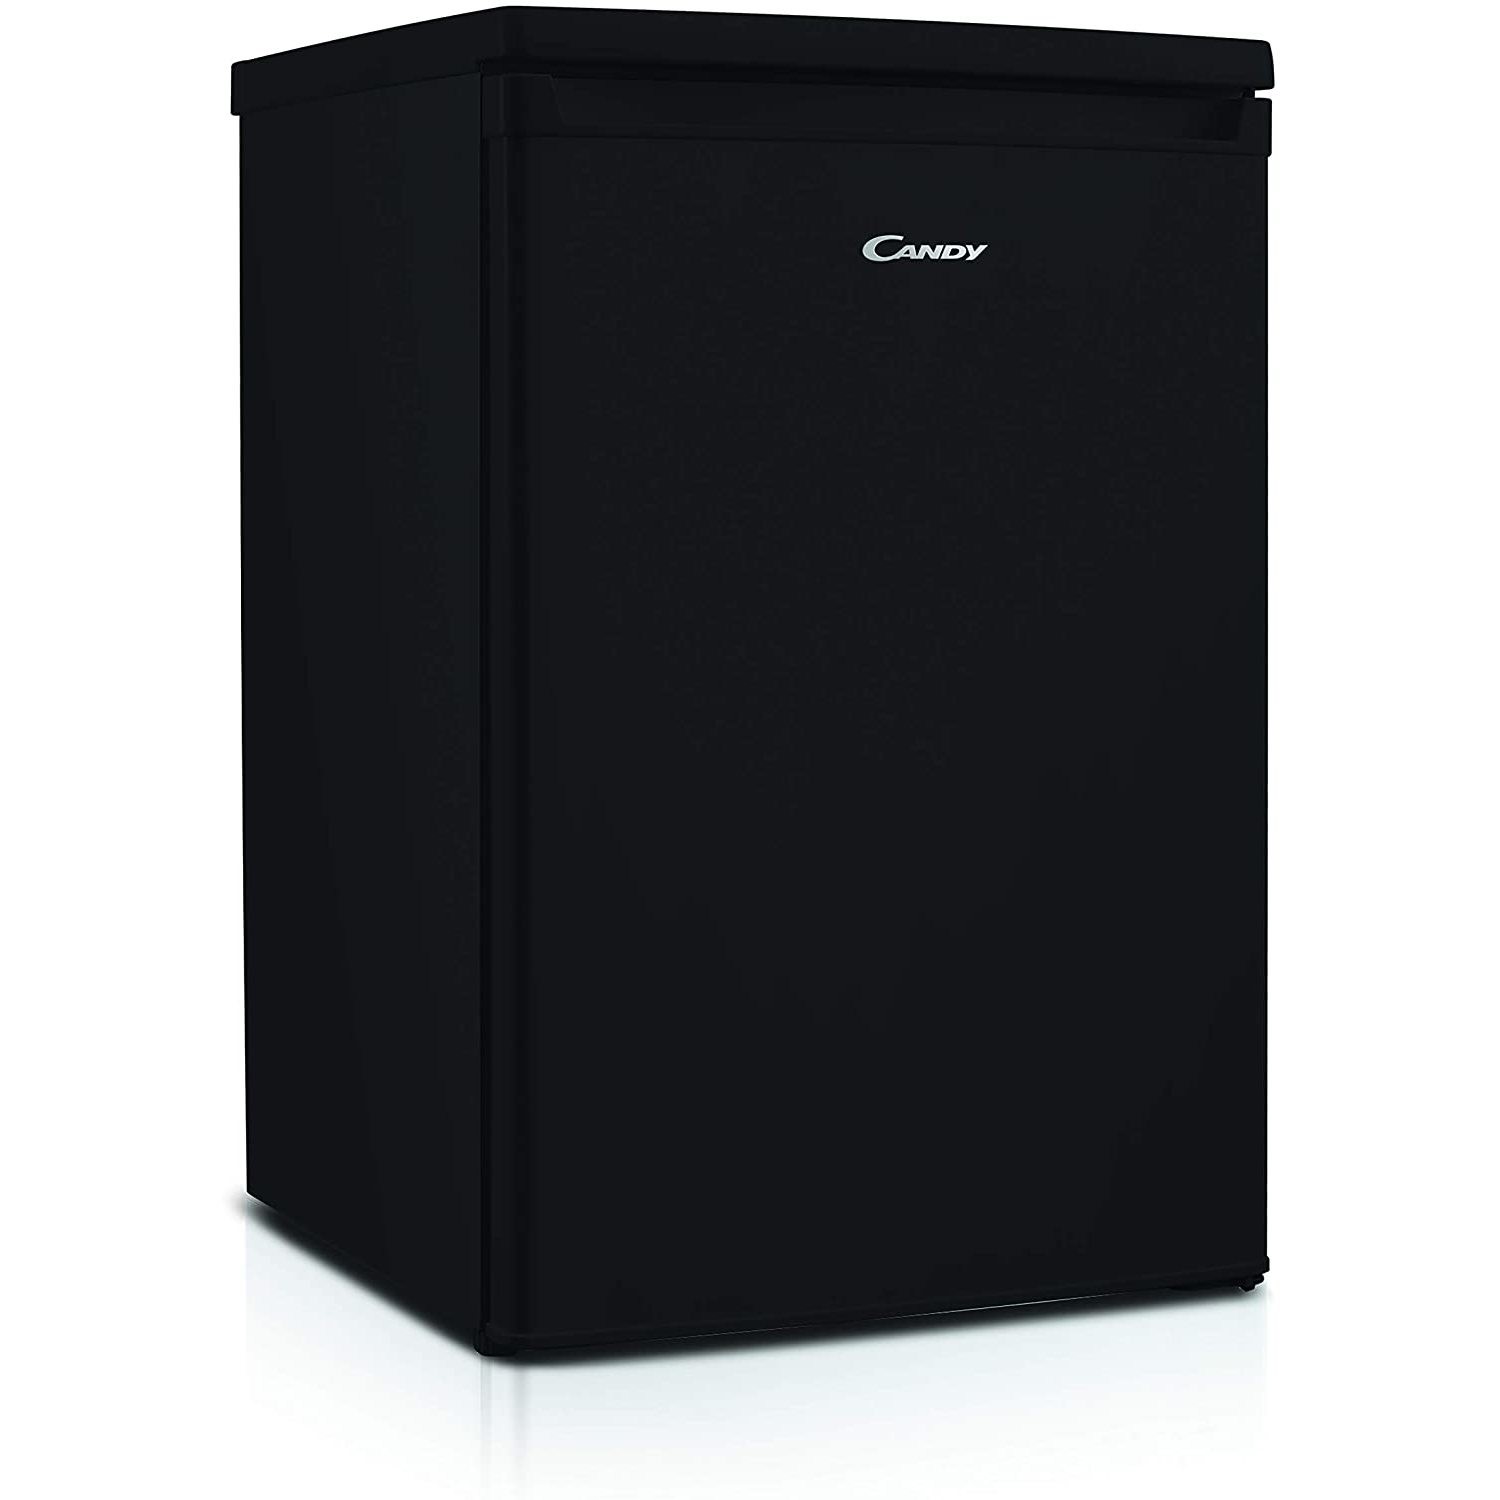 Rated Freezer in Black Candy CTZ552BK Freestanding A